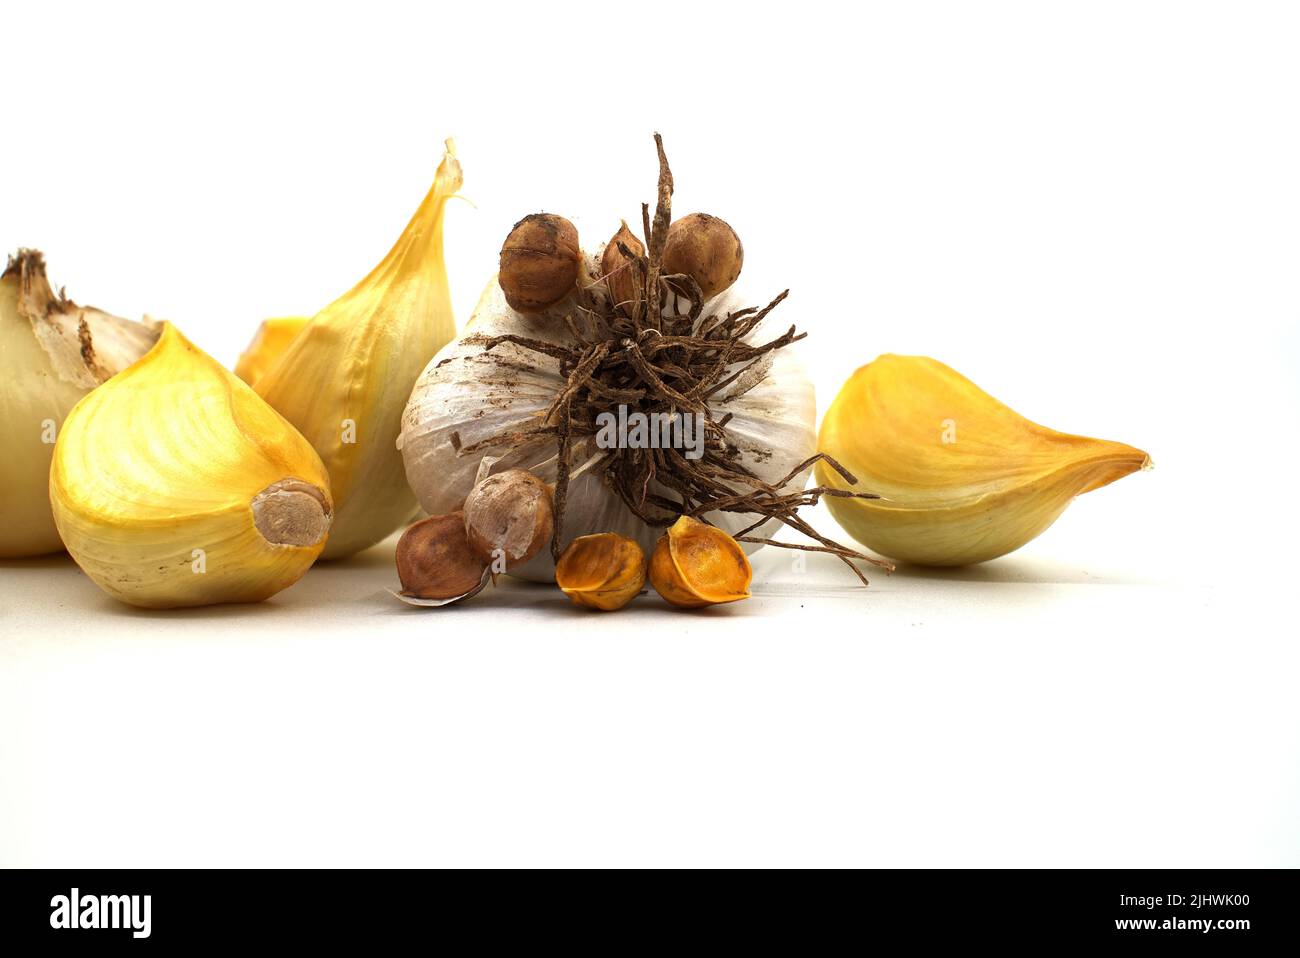 Elephant garlic (Allium ampeloprasum) bulb with corms and separated cloves prepared for planting over a white background Stock Photo